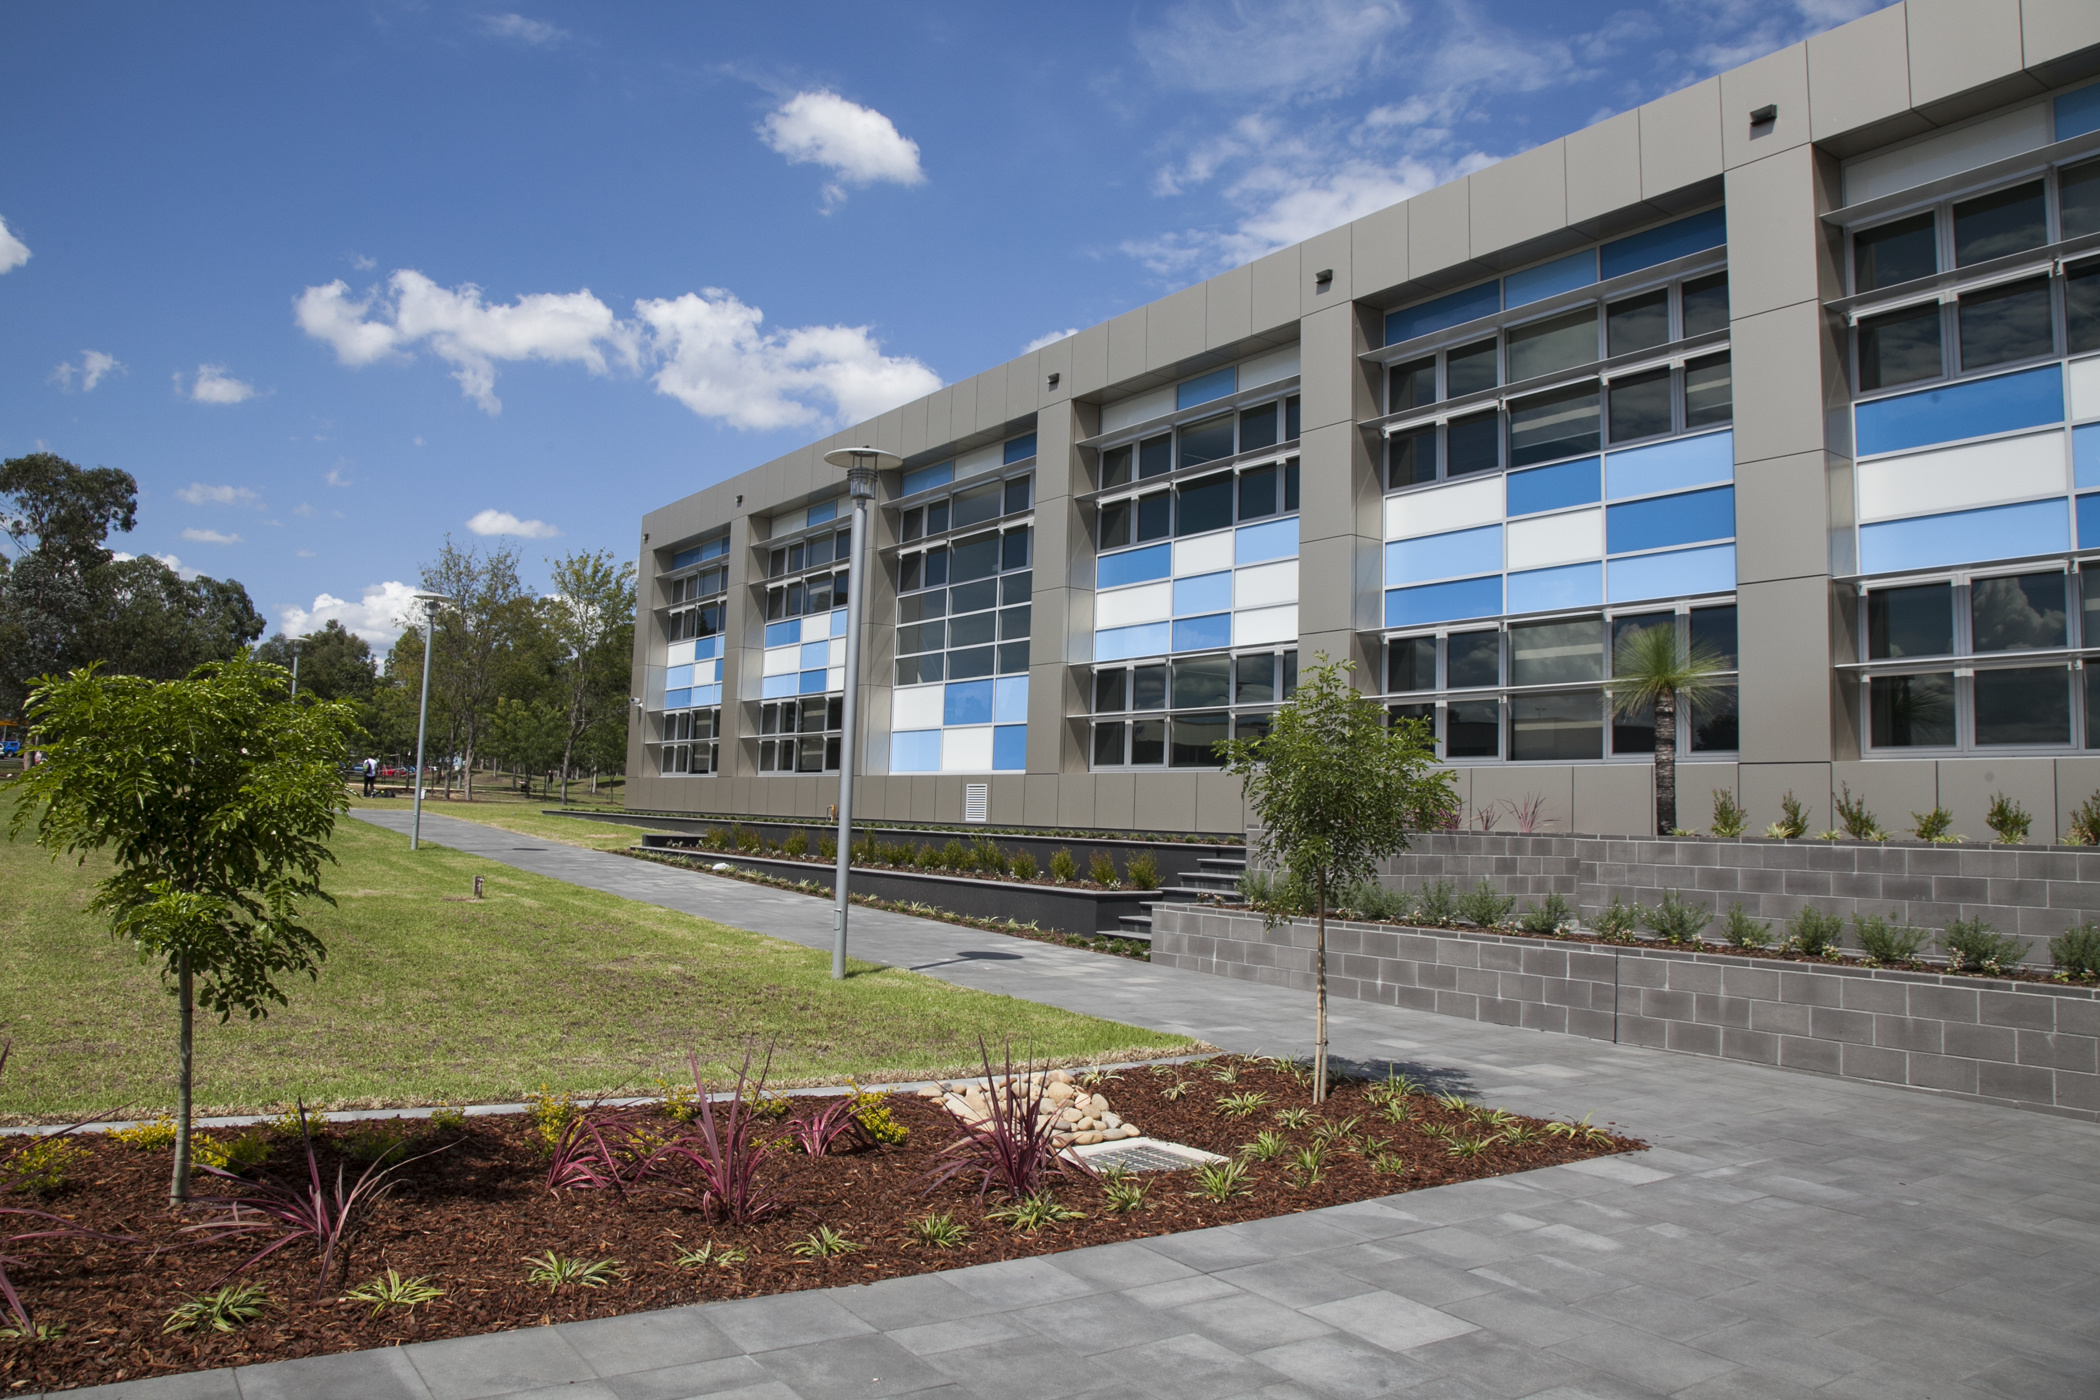 Situated in Quakers Hill, the Nirimba Campus is home to The College. The campus includes a swimming pool, Library and student accommodation.